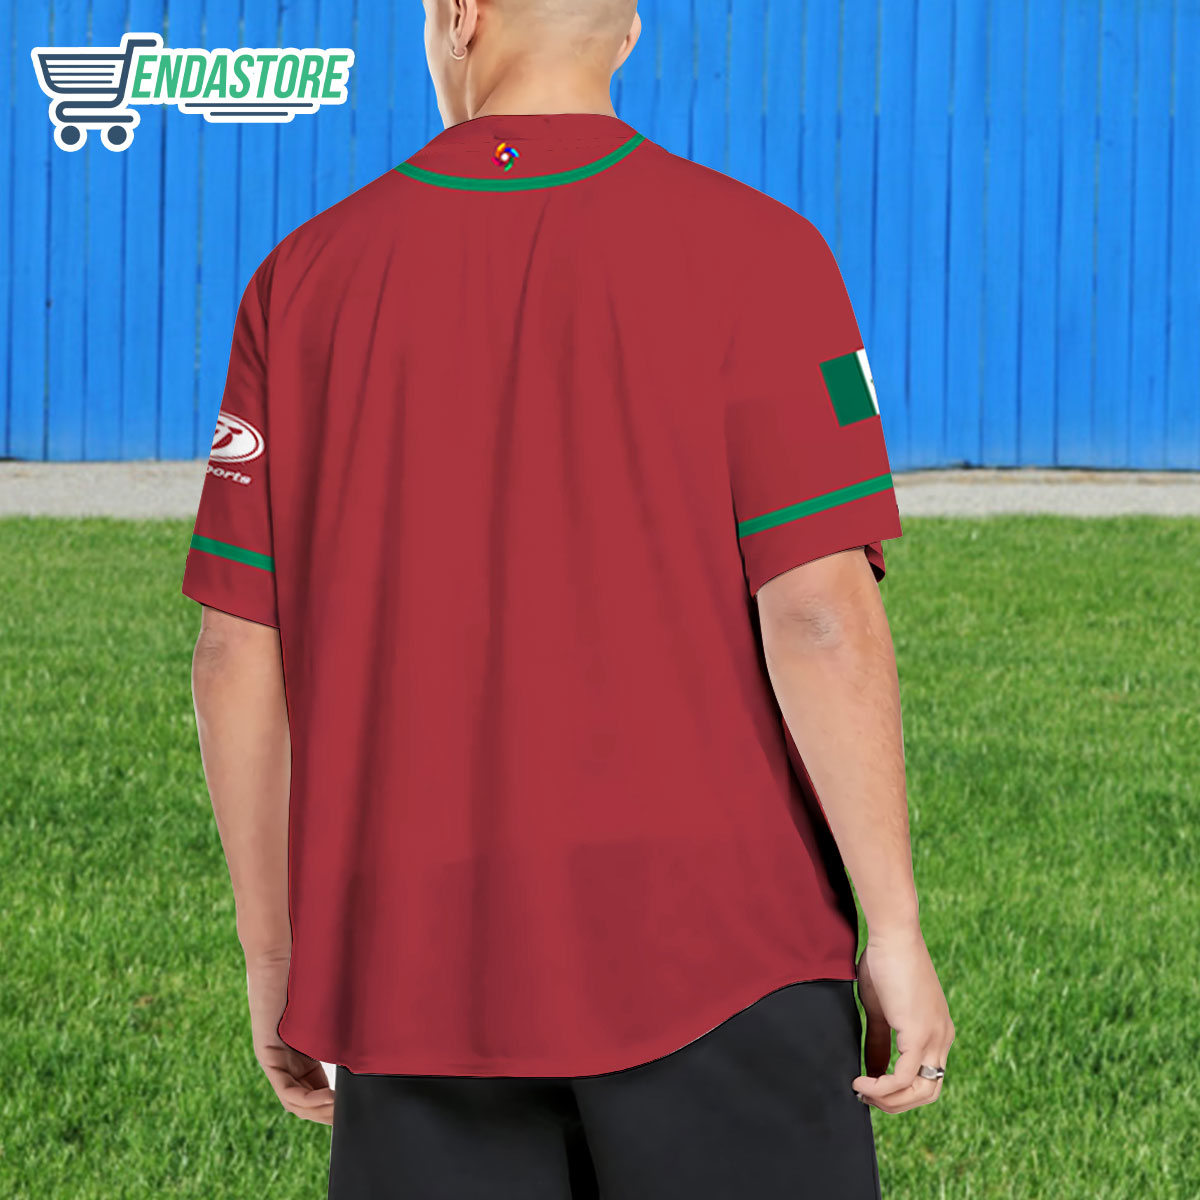 red mexico baseball jersey